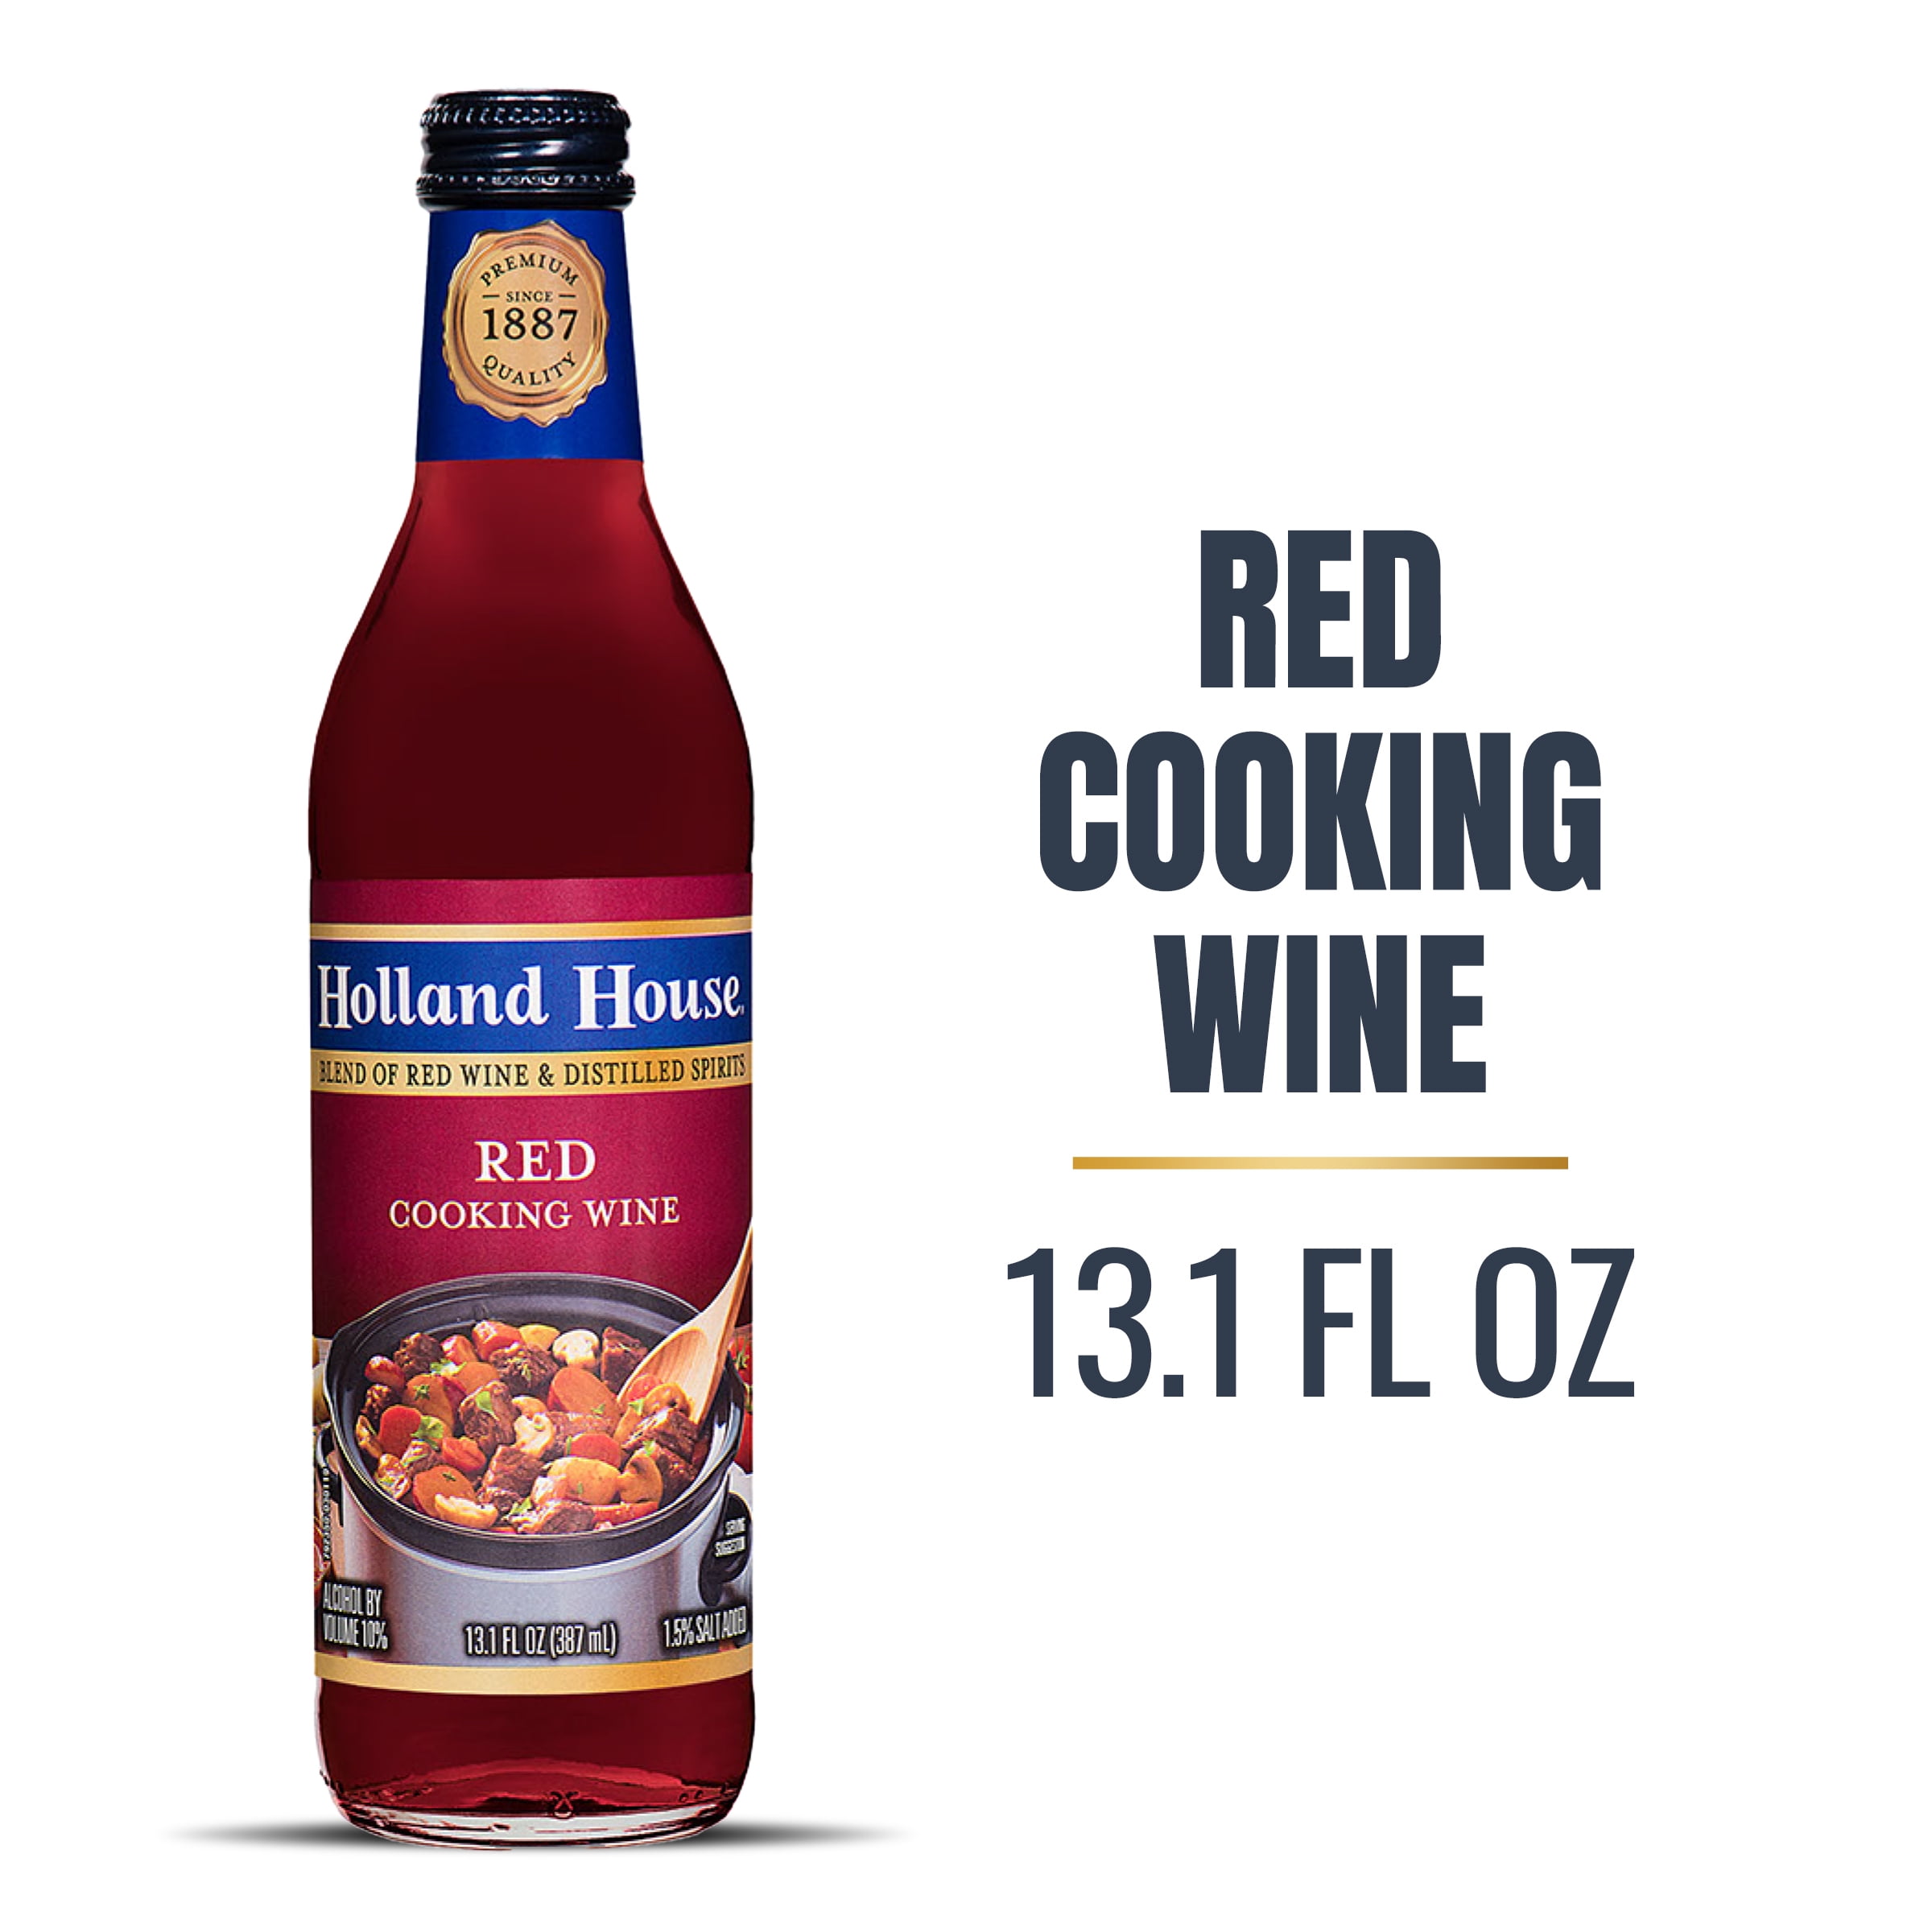 Holland House Red Cooking Wine, Ideal for Cooking, Roasting and Marinating, 13 FL OZ